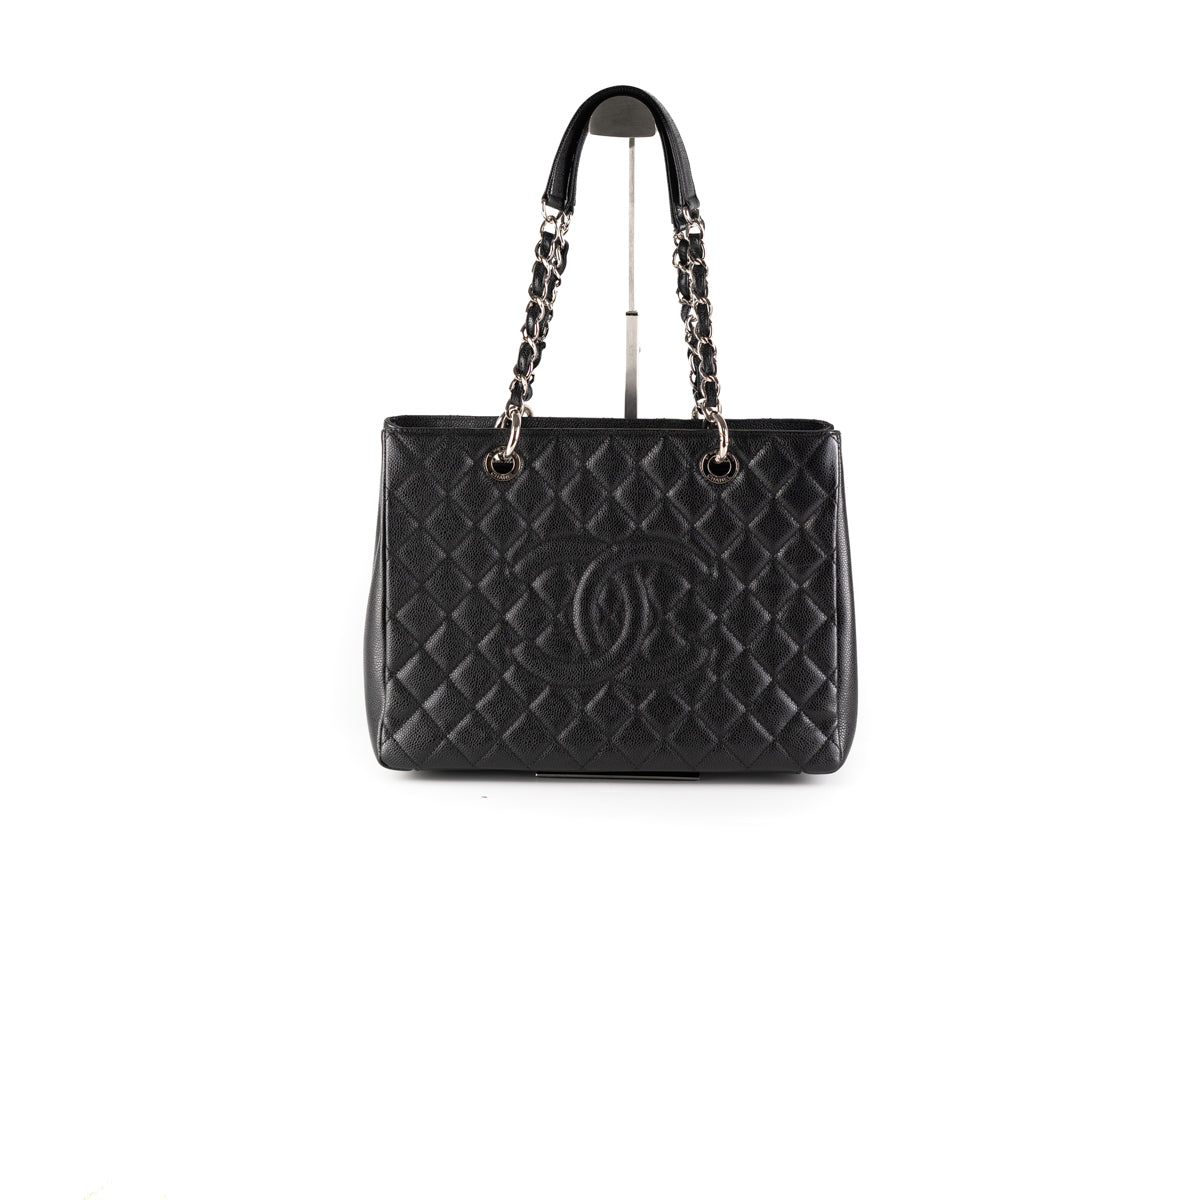 CHANEL Reissue Cerf Executive East West Leather Tote Bag Black